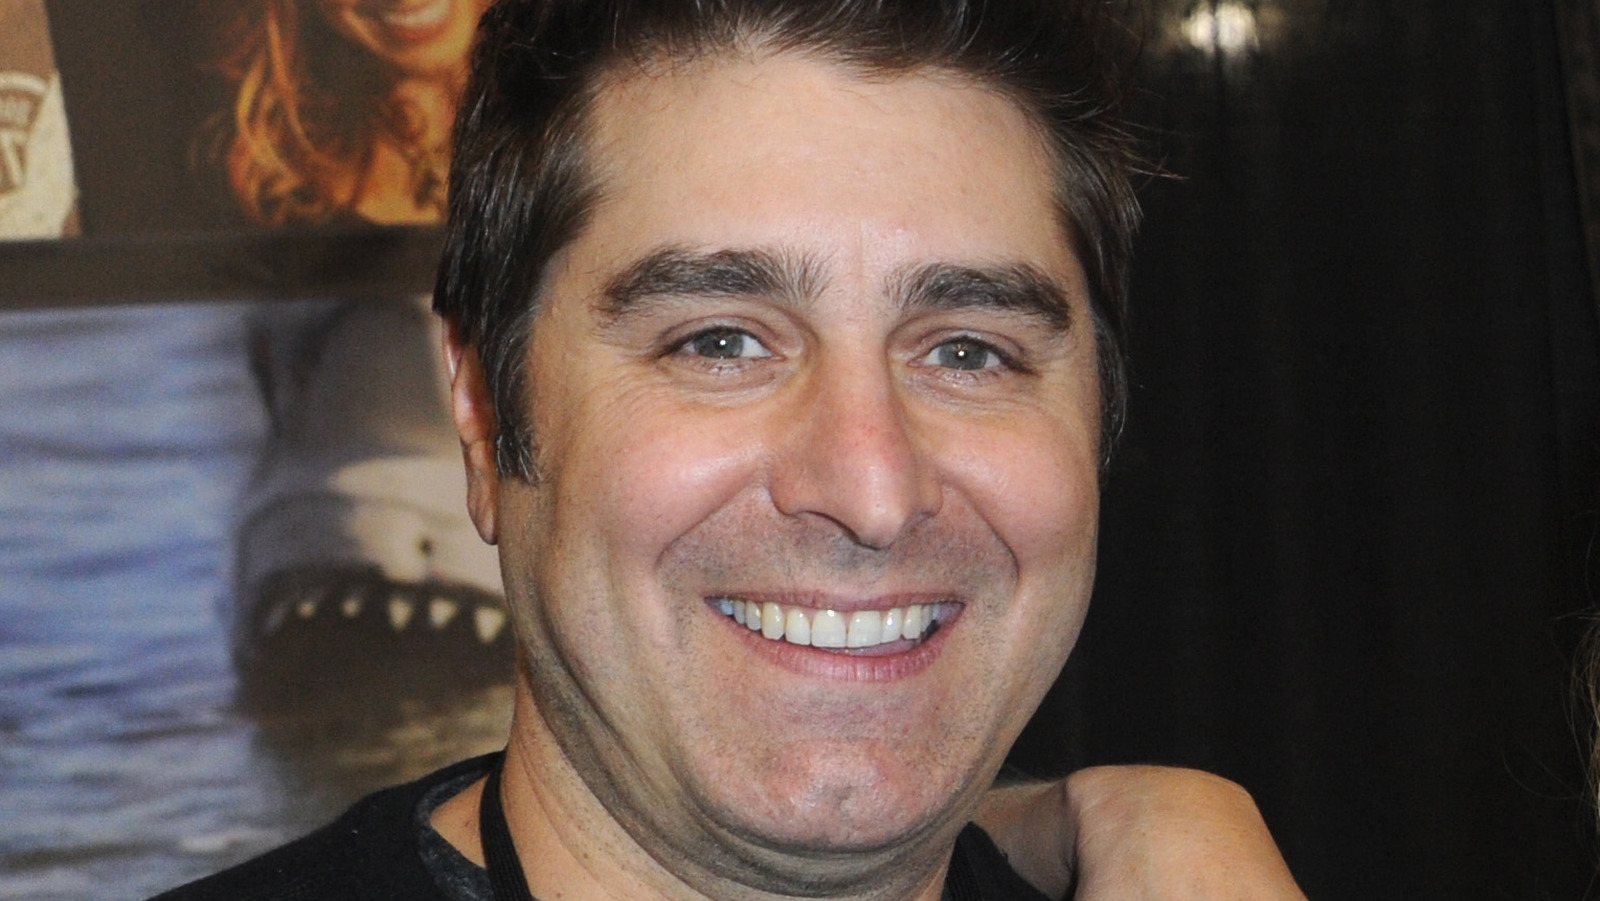 The Truth About Tory Belleci's Explosive Childhood